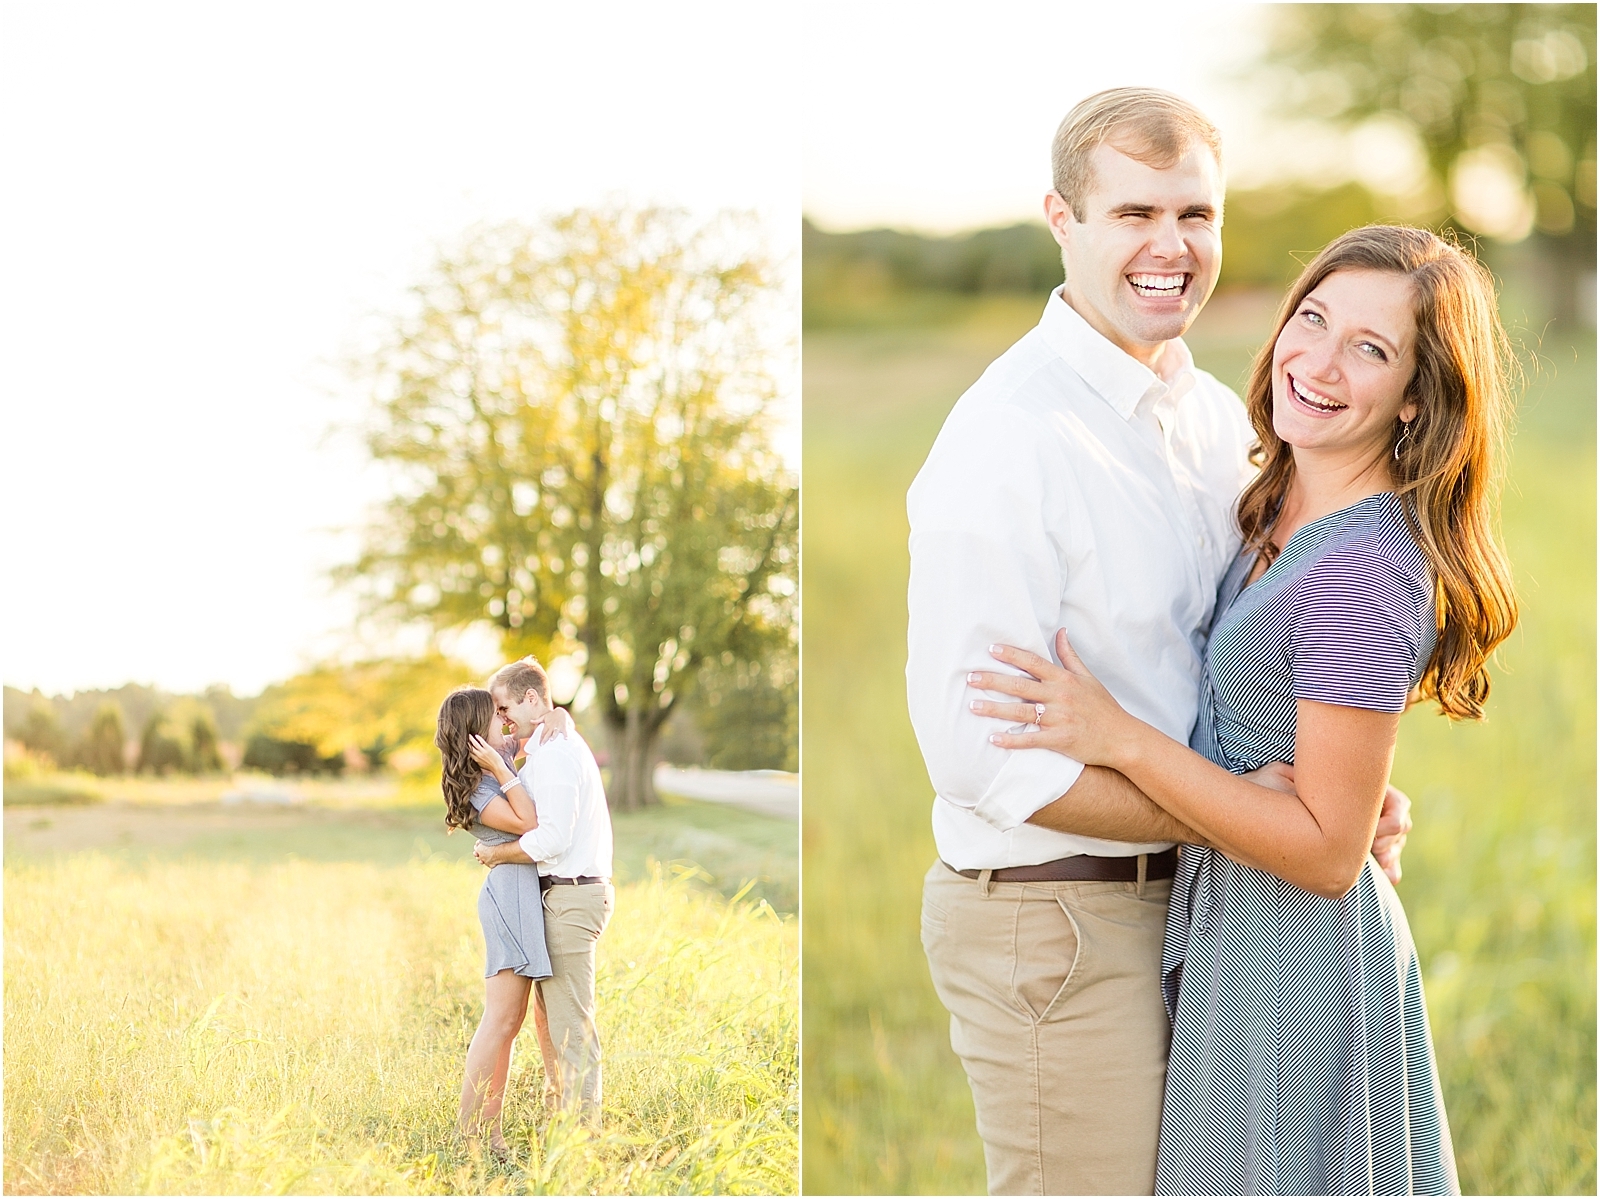 Stacey and Thomas | Engaged0022.jpg